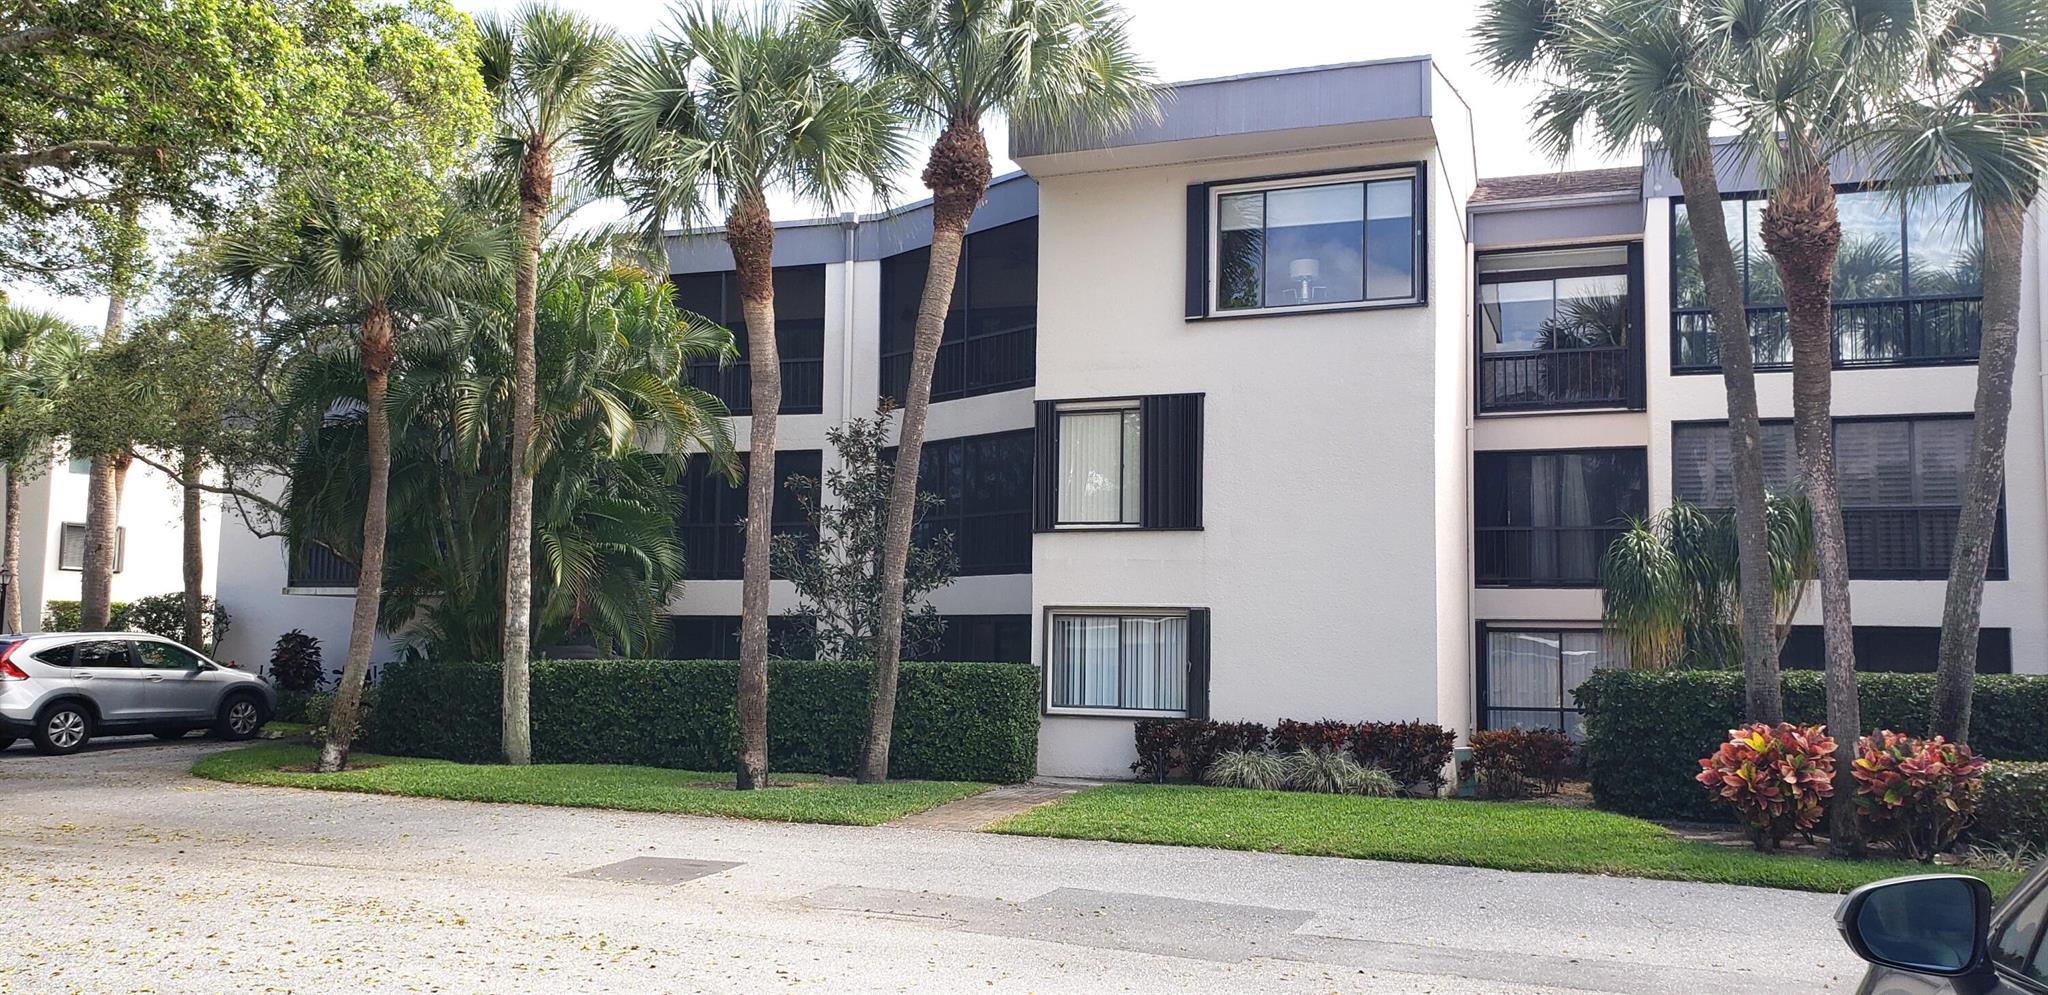 Large and spacious 2/2 condo with boat slips and intracoastal views on premises. Newly renovated kitchen and 2 separate balconies. Updated bathrooms. Brand new water heater and a/c 2014. Hurricane shutters, and full-size washer/dryer. Lots of storage space. NOT a waterfront condo. Boat slips have a waiting list. A walk away from your front door. Must reside in the community to purchase or rent. 24-hour guard gate, close to great restaurants and premier shopping. Beaches 1 mile away. Owner can rent immediately if so desired. Tennis court, and 2 pools. There is a storage unit deeded with the condo. Waterfront on opposite side of the building.